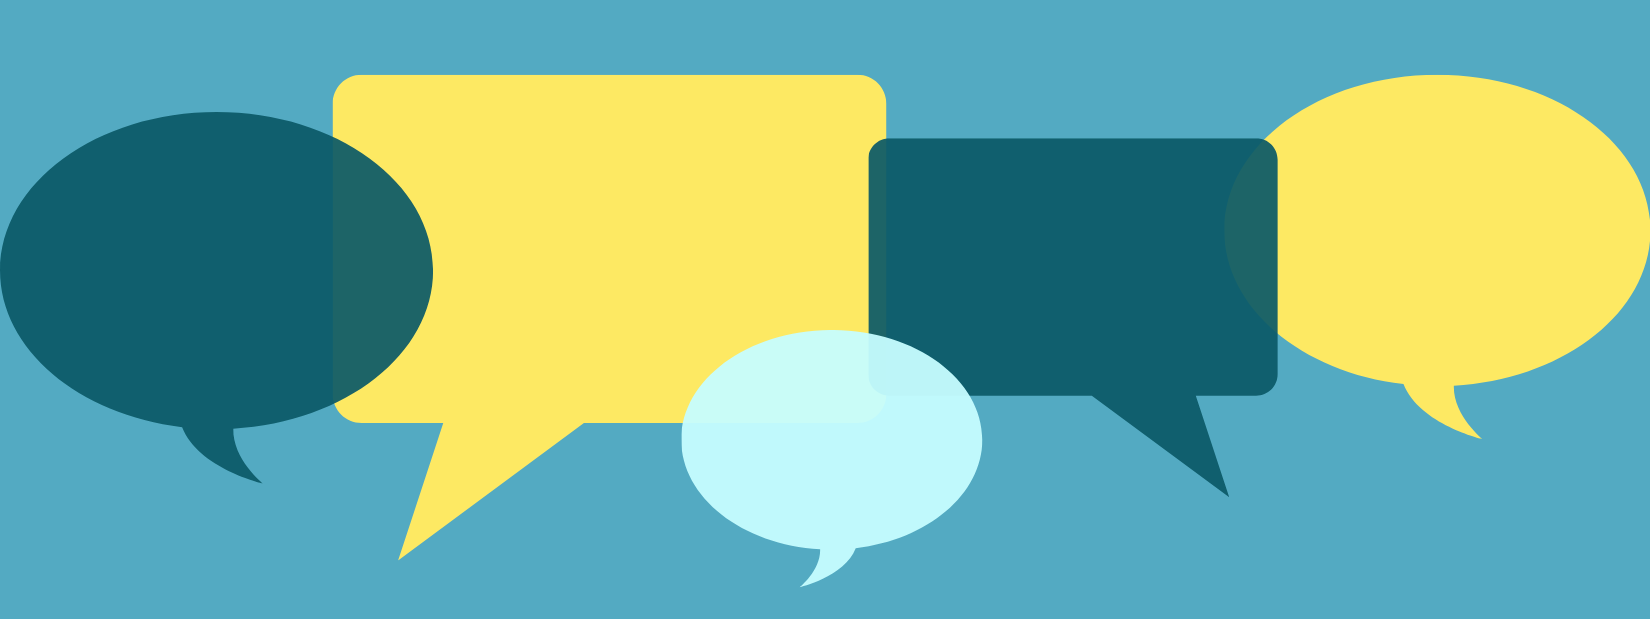 Teal background with yellow, dark teal and light blue speech bubbles.